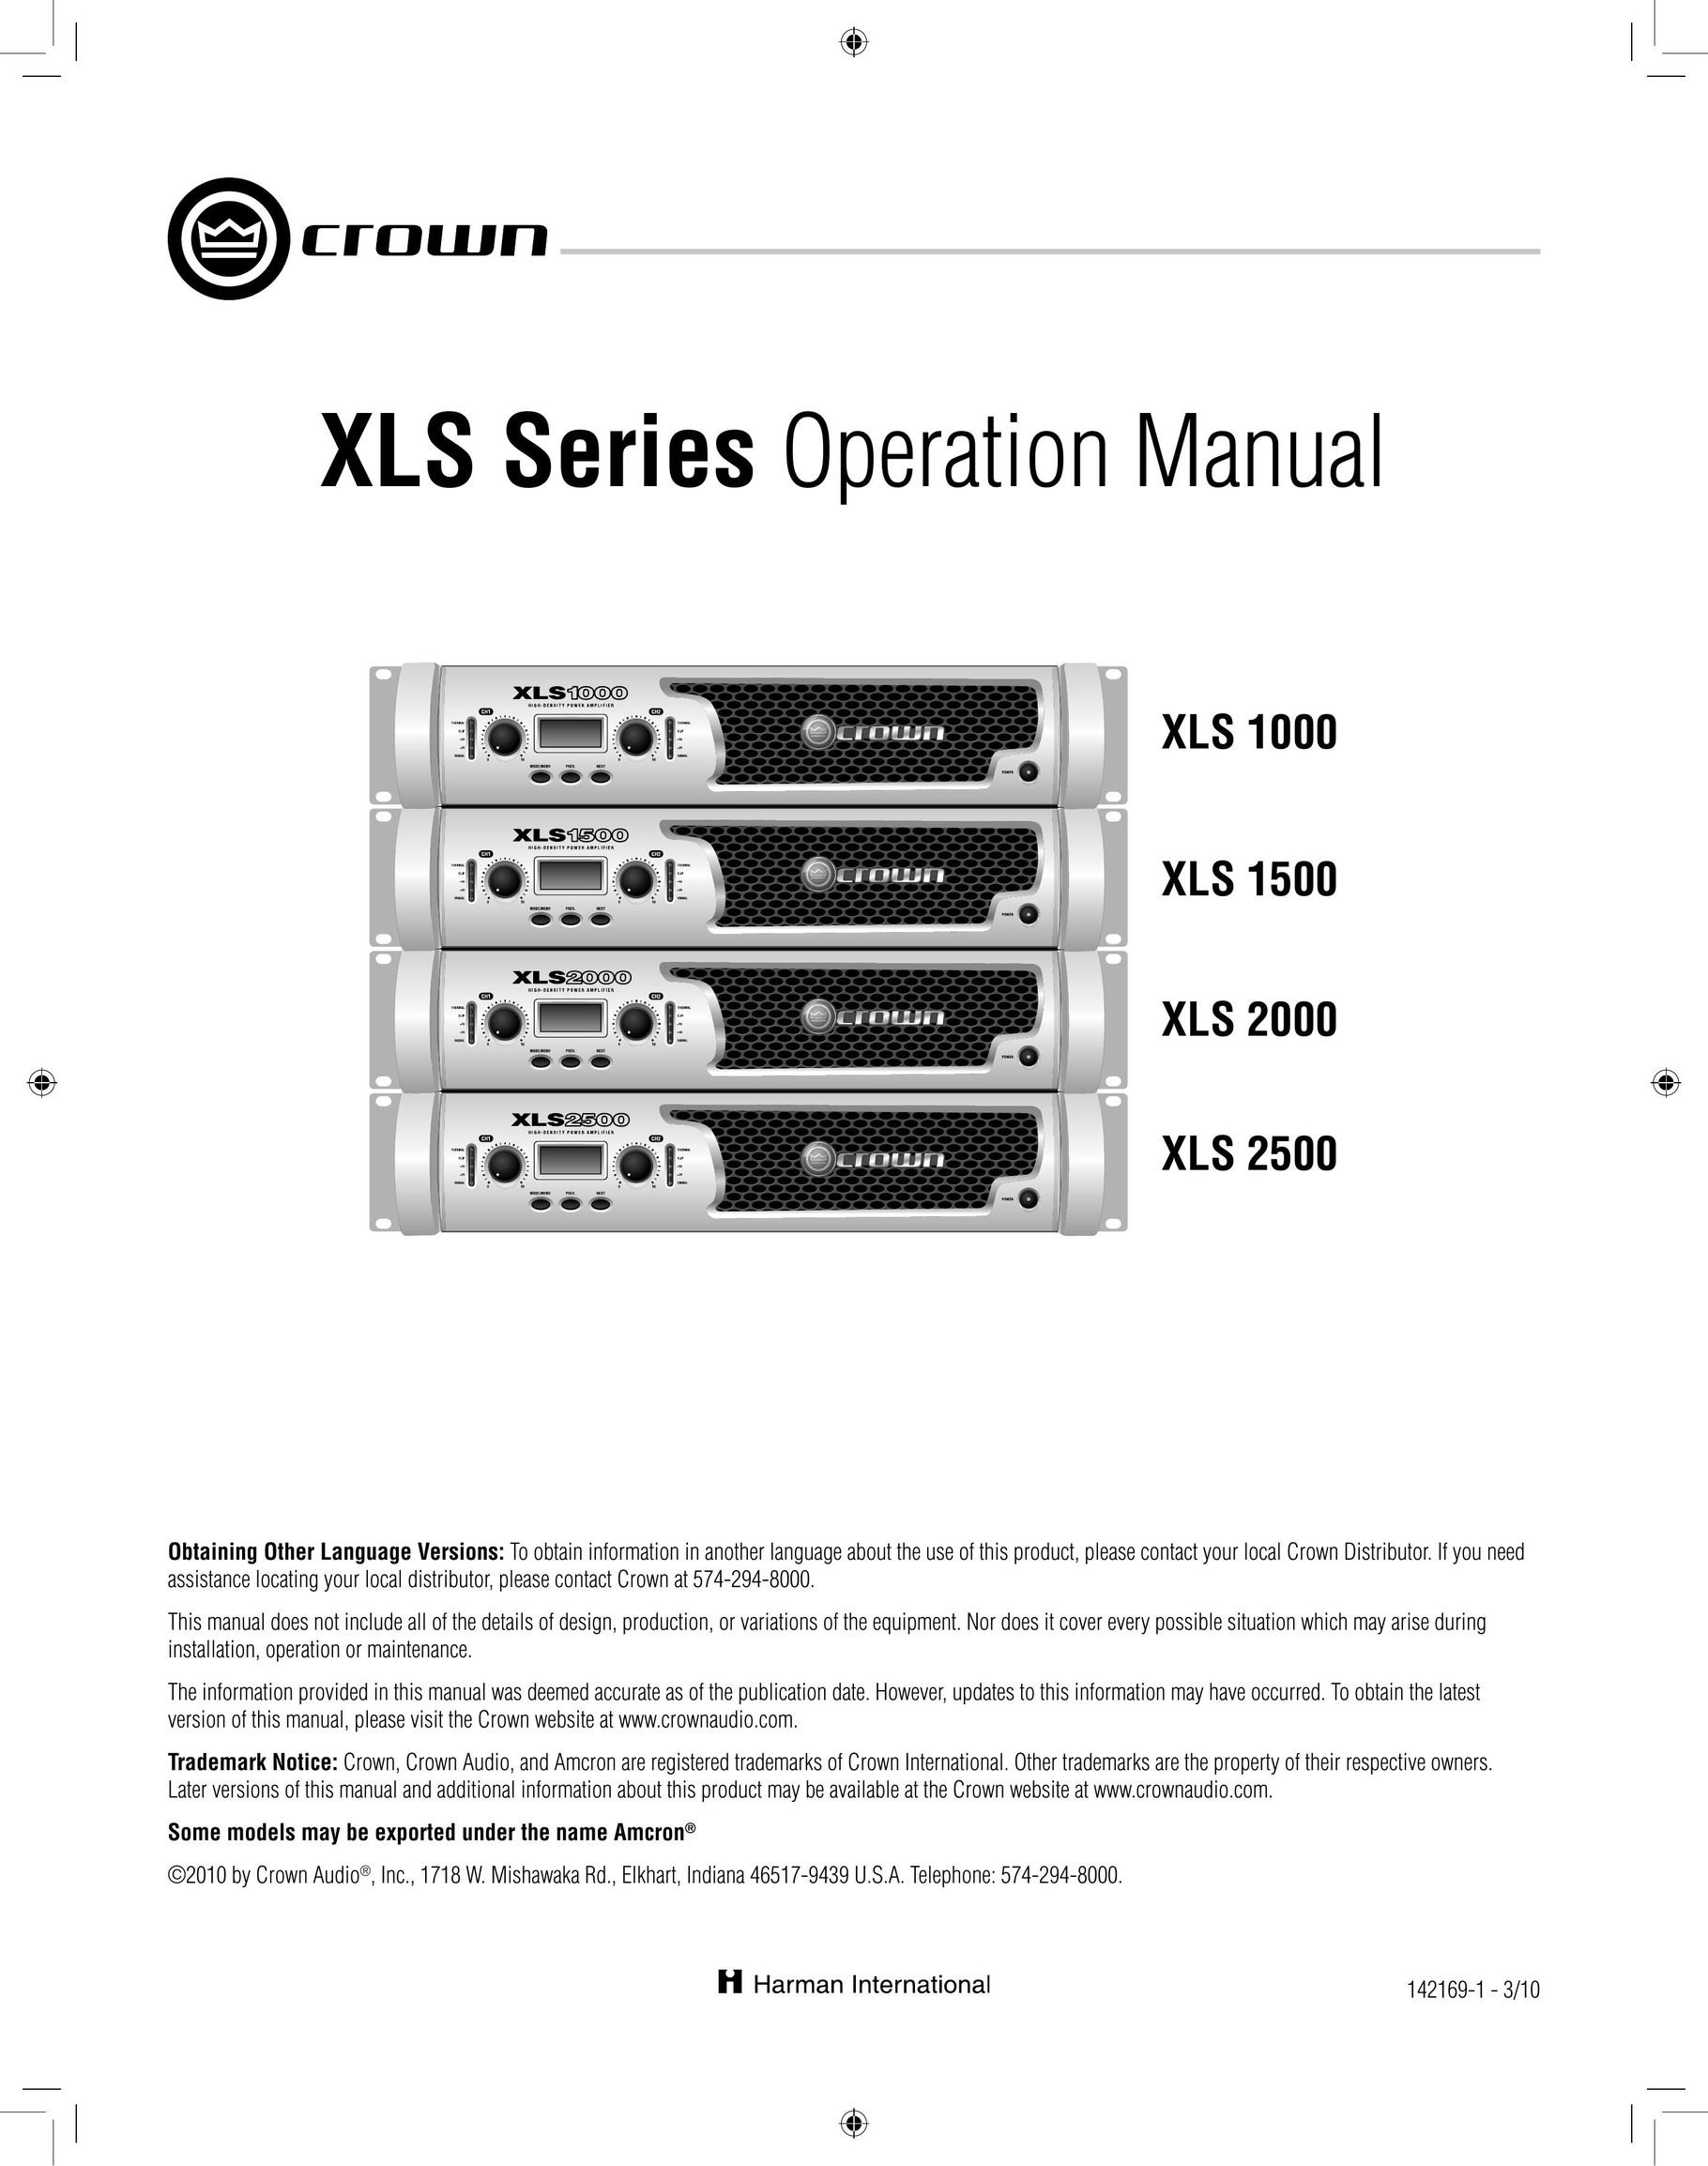 Crown XLS2000 Stereo Amplifier User Manual